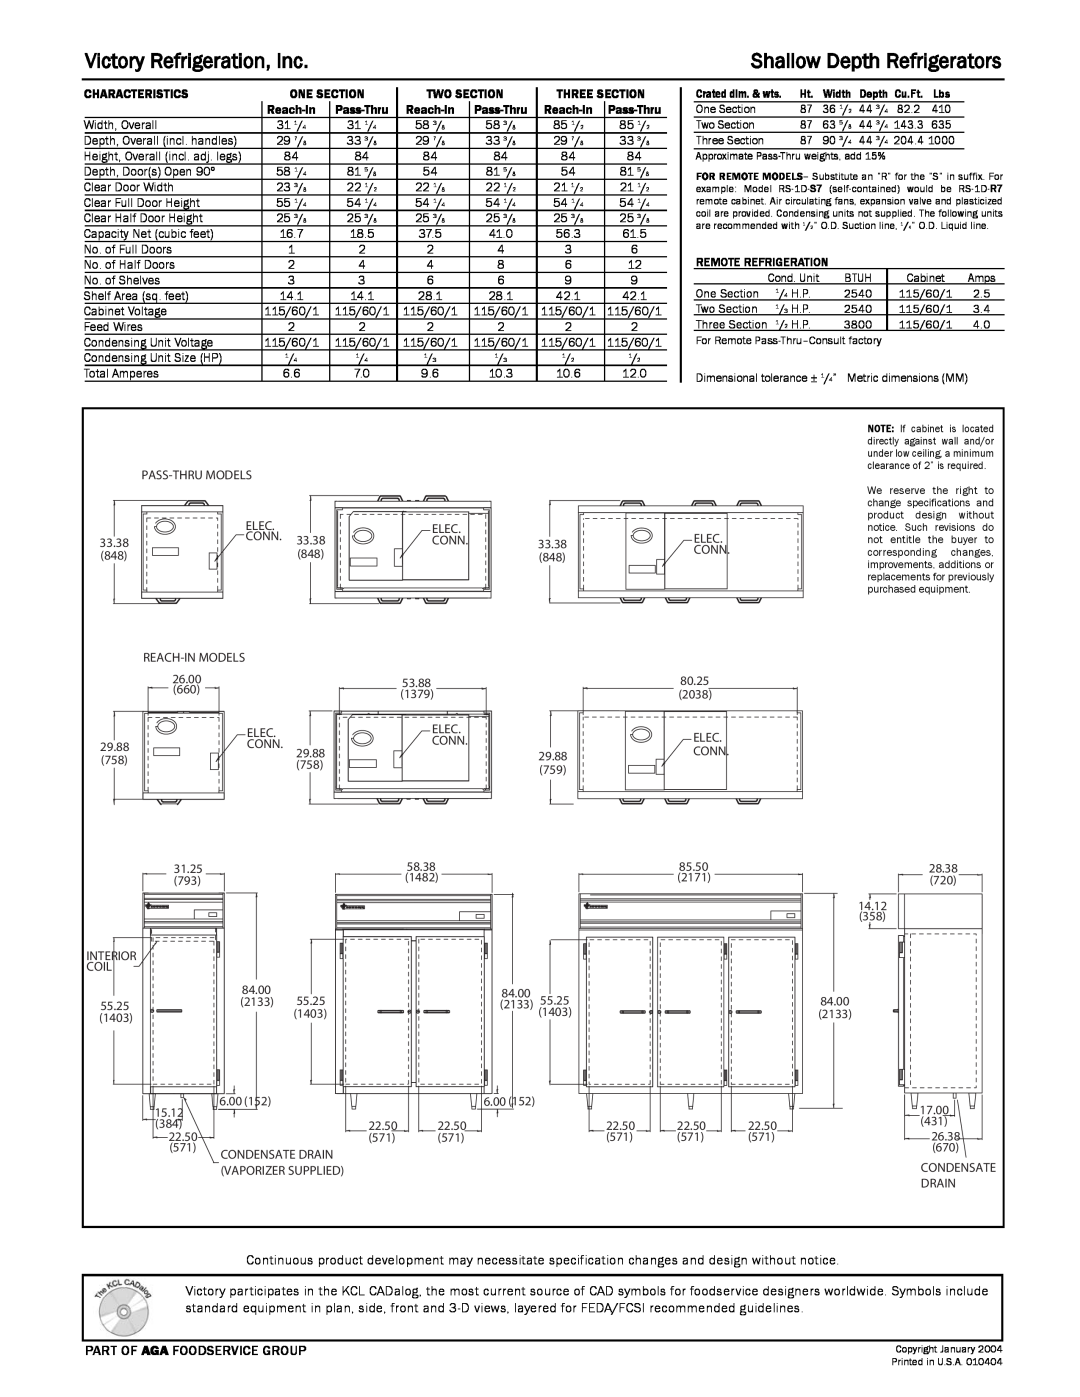 Victory Refrigeration RS-3N-S7 specifications Victory Refrigeration, Inc, Shallow Depth Refrigerators 